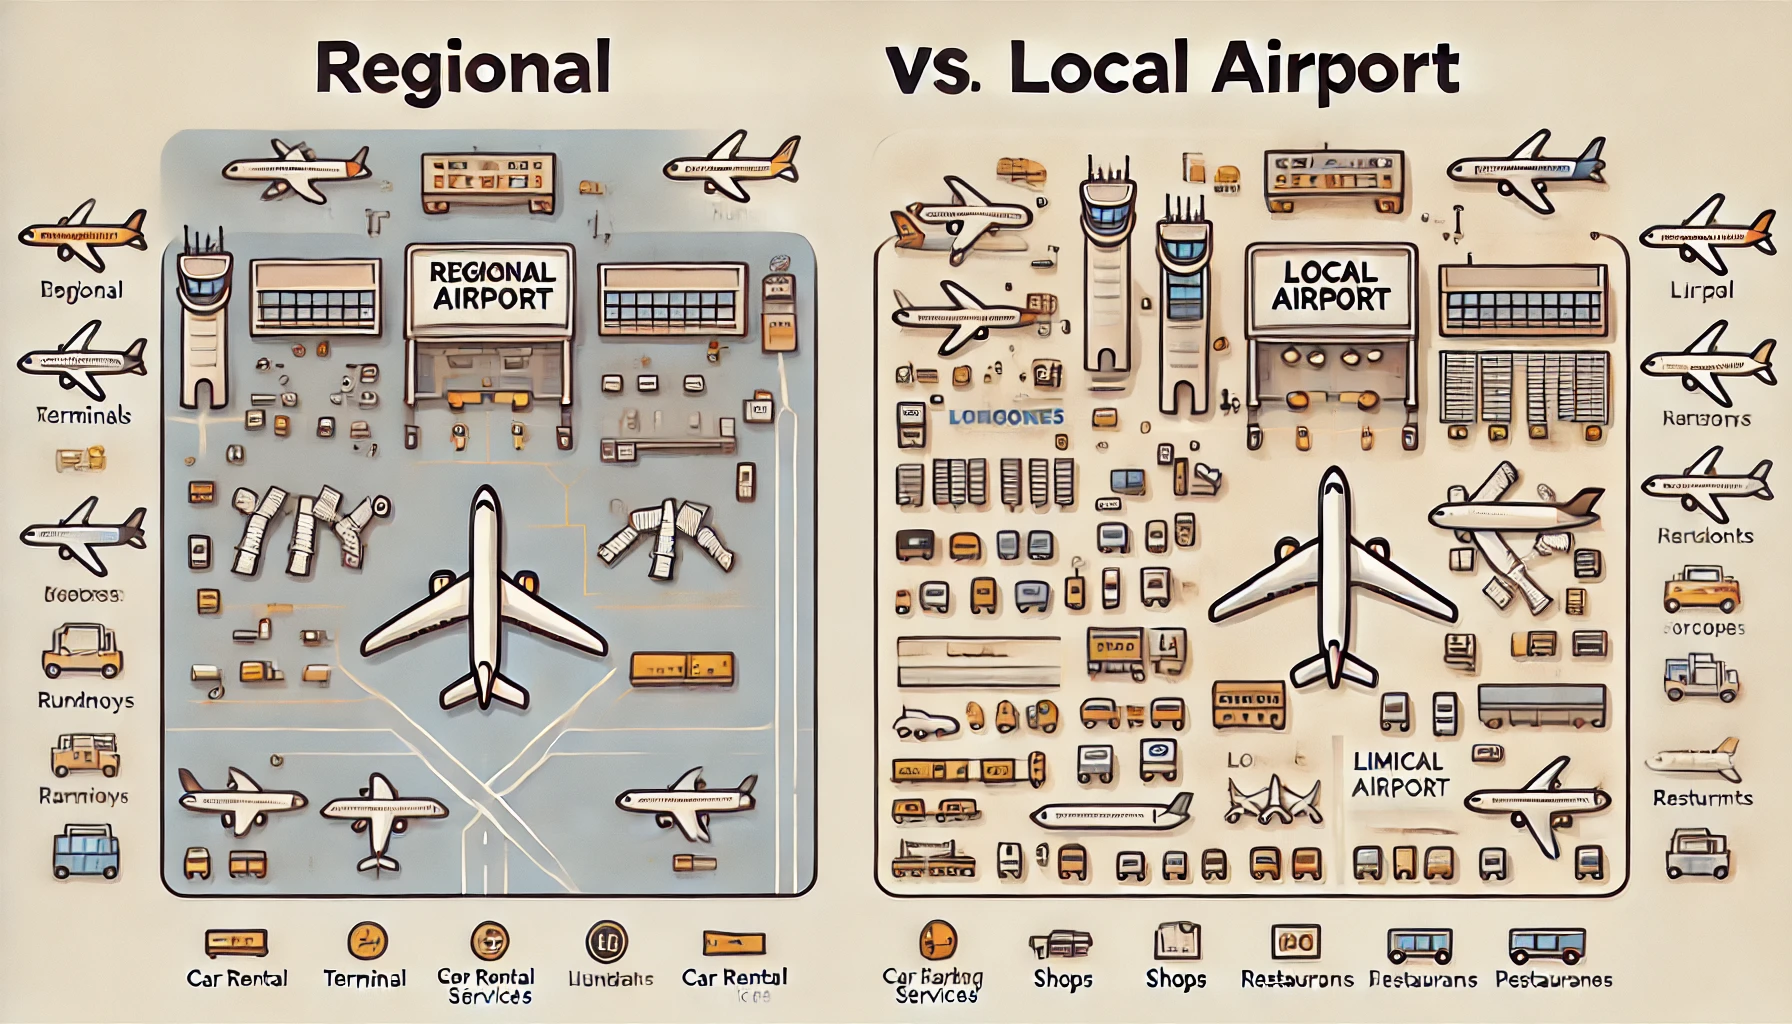 Differences between Regional and Local Airports